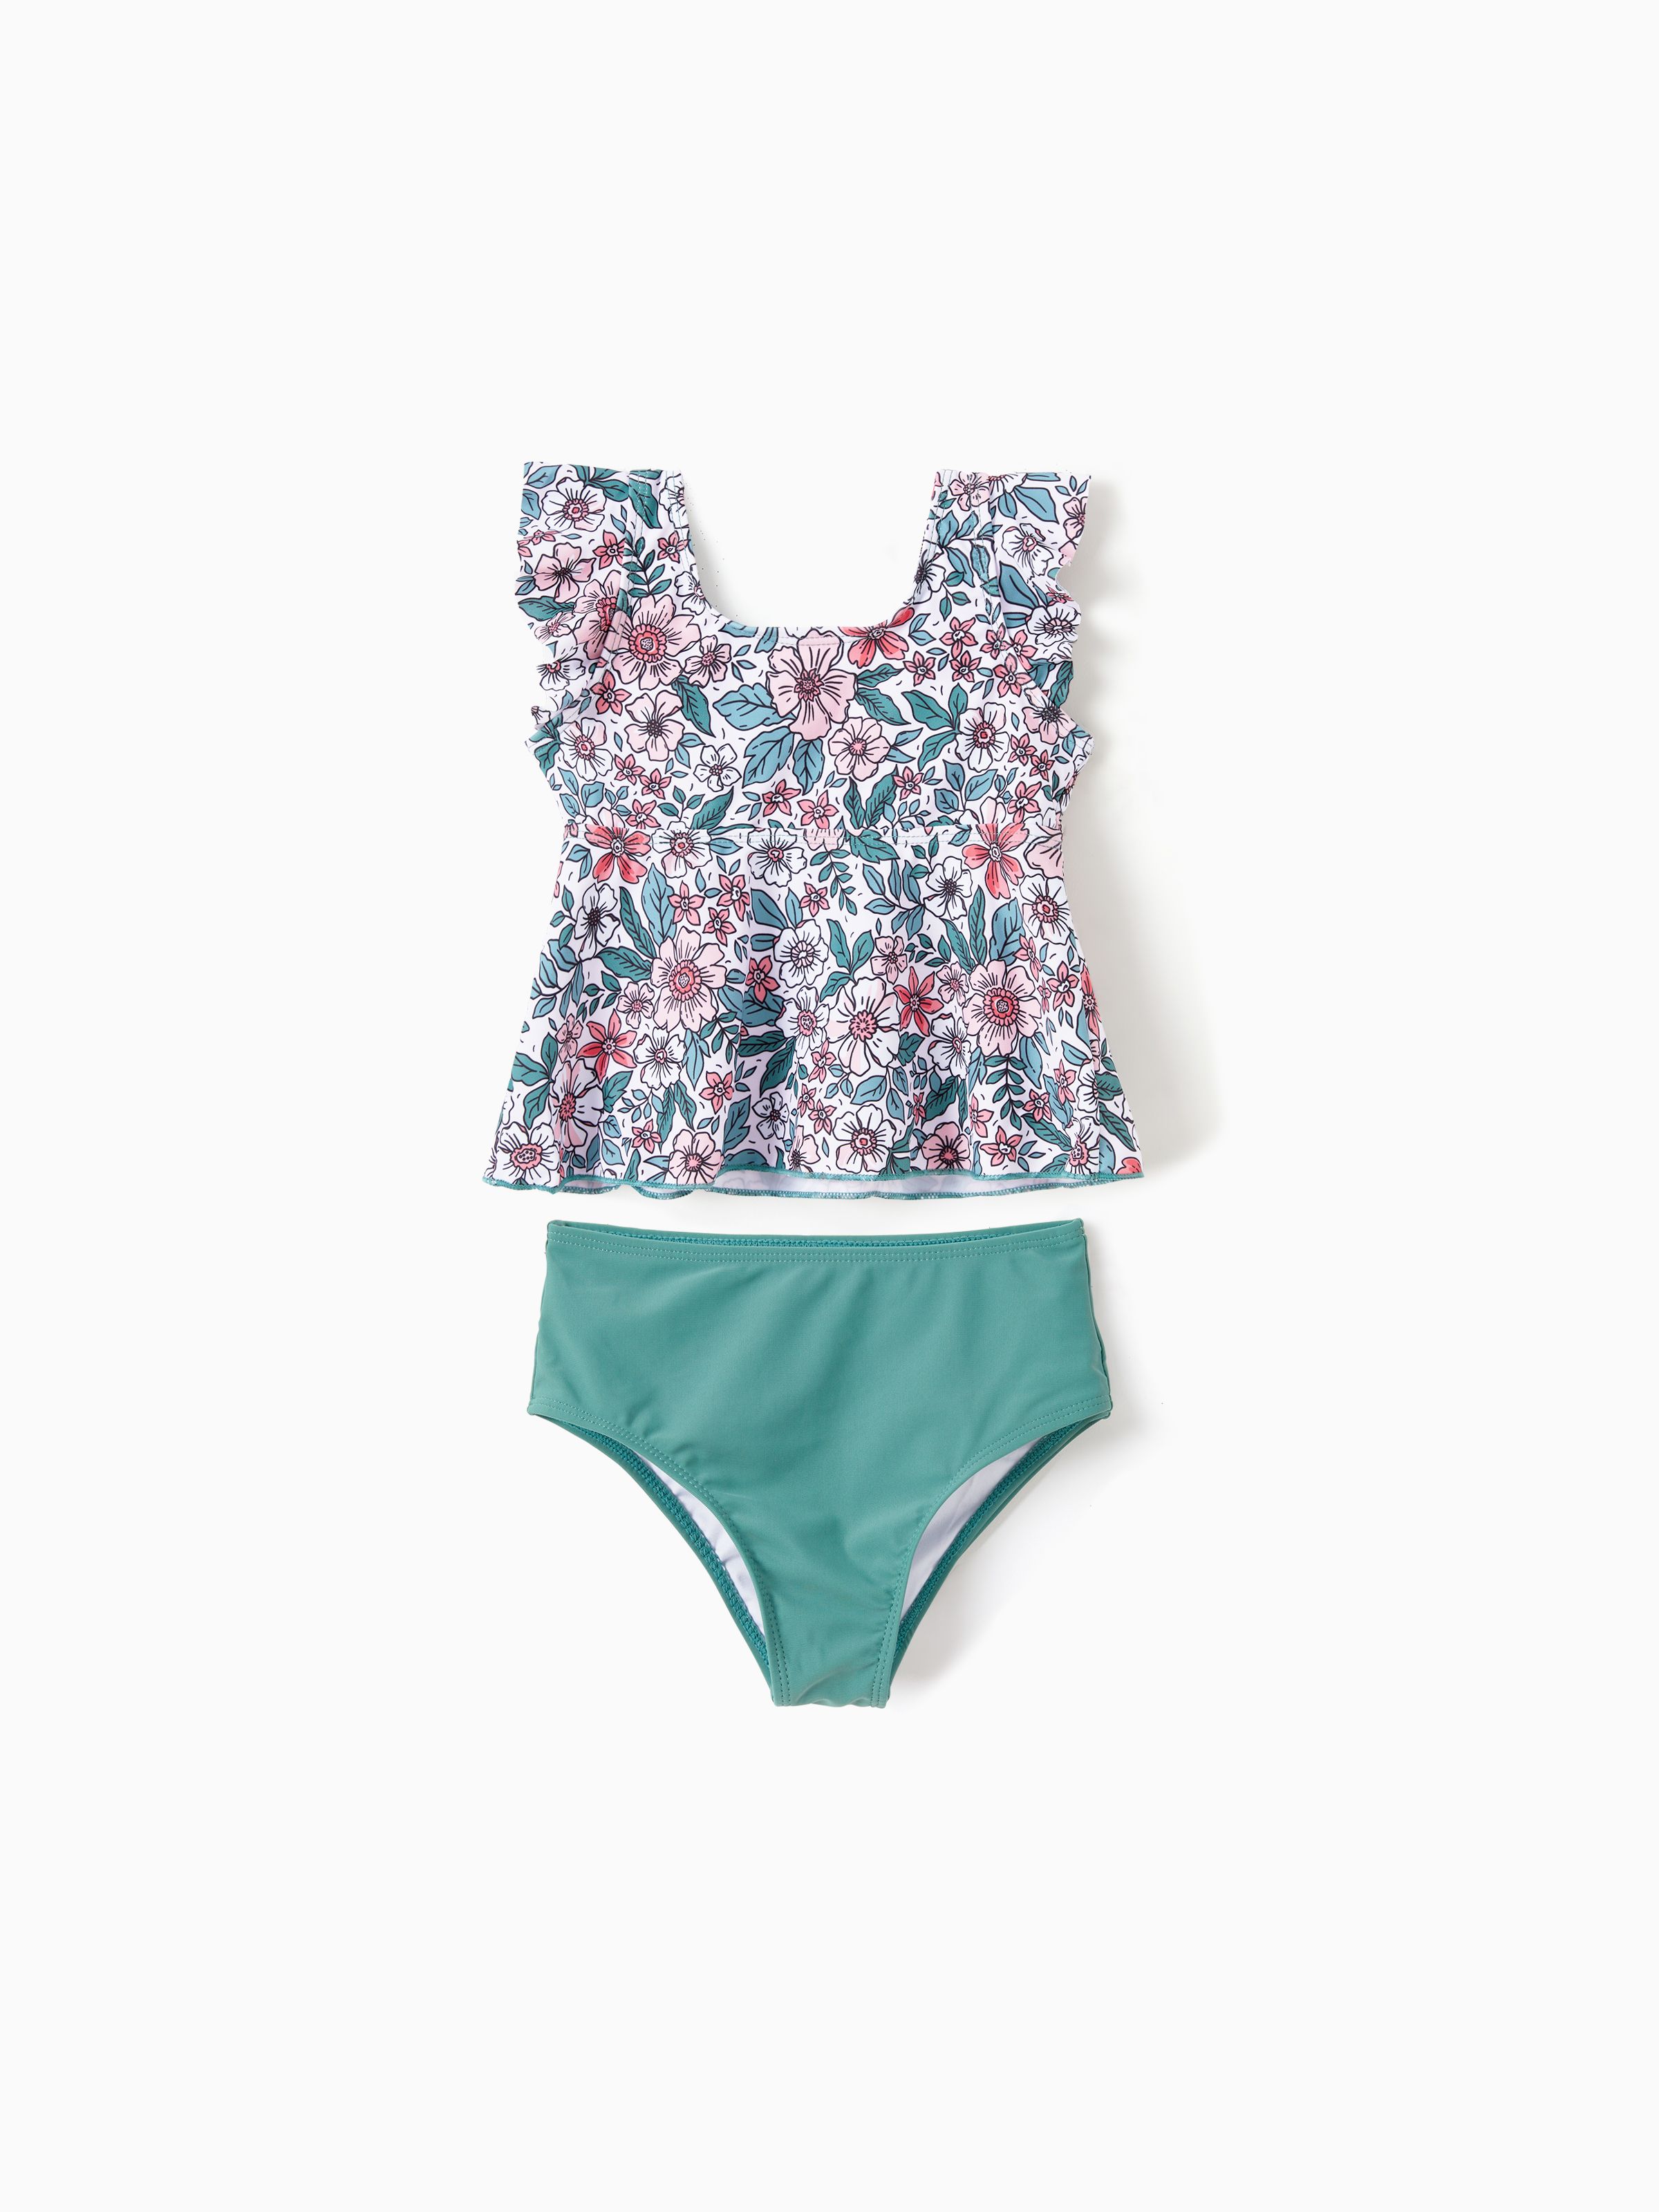 

Family Matching Swimsuits Color Block Drawstring Swim Trunks or Floral Top High Waist Bottom Tankini